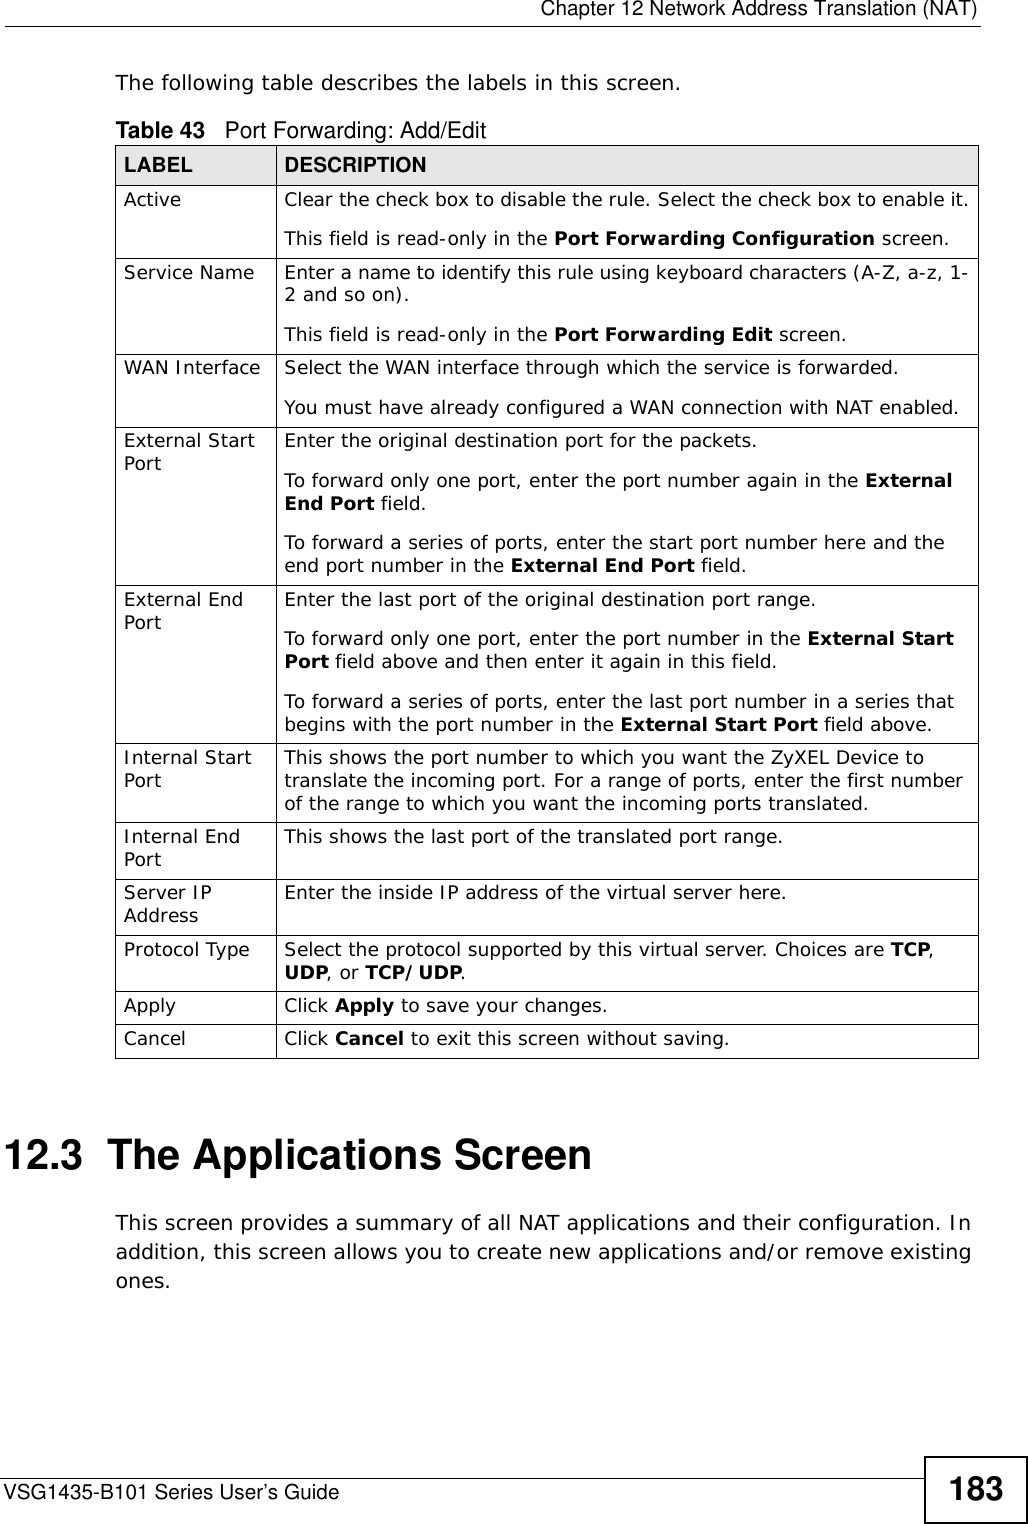  Chapter 12 Network Address Translation (NAT)VSG1435-B101 Series User’s Guide 183The following table describes the labels in this screen. 12.3  The Applications ScreenThis screen provides a summary of all NAT applications and their configuration. In addition, this screen allows you to create new applications and/or remove existing ones.Table 43   Port Forwarding: Add/EditLABEL DESCRIPTIONActive Clear the check box to disable the rule. Select the check box to enable it.This field is read-only in the Port Forwarding Configuration screen.Service Name Enter a name to identify this rule using keyboard characters (A-Z, a-z, 1-2 and so on). This field is read-only in the Port Forwarding Edit screen.WAN Interface Select the WAN interface through which the service is forwarded.You must have already configured a WAN connection with NAT enabled.External Start Port Enter the original destination port for the packets.To forward only one port, enter the port number again in the External End Port field. To forward a series of ports, enter the start port number here and the end port number in the External End Port field.External End Port  Enter the last port of the original destination port range. To forward only one port, enter the port number in the External Start Port field above and then enter it again in this field. To forward a series of ports, enter the last port number in a series that begins with the port number in the External Start Port field above.Internal Start Port This shows the port number to which you want the ZyXEL Device to translate the incoming port. For a range of ports, enter the first number of the range to which you want the incoming ports translated.Internal End Port  This shows the last port of the translated port range.Server IP Address Enter the inside IP address of the virtual server here.Protocol Type Select the protocol supported by this virtual server. Choices are TCP, UDP, or TCP/UDP.Apply Click Apply to save your changes.Cancel Click Cancel to exit this screen without saving.